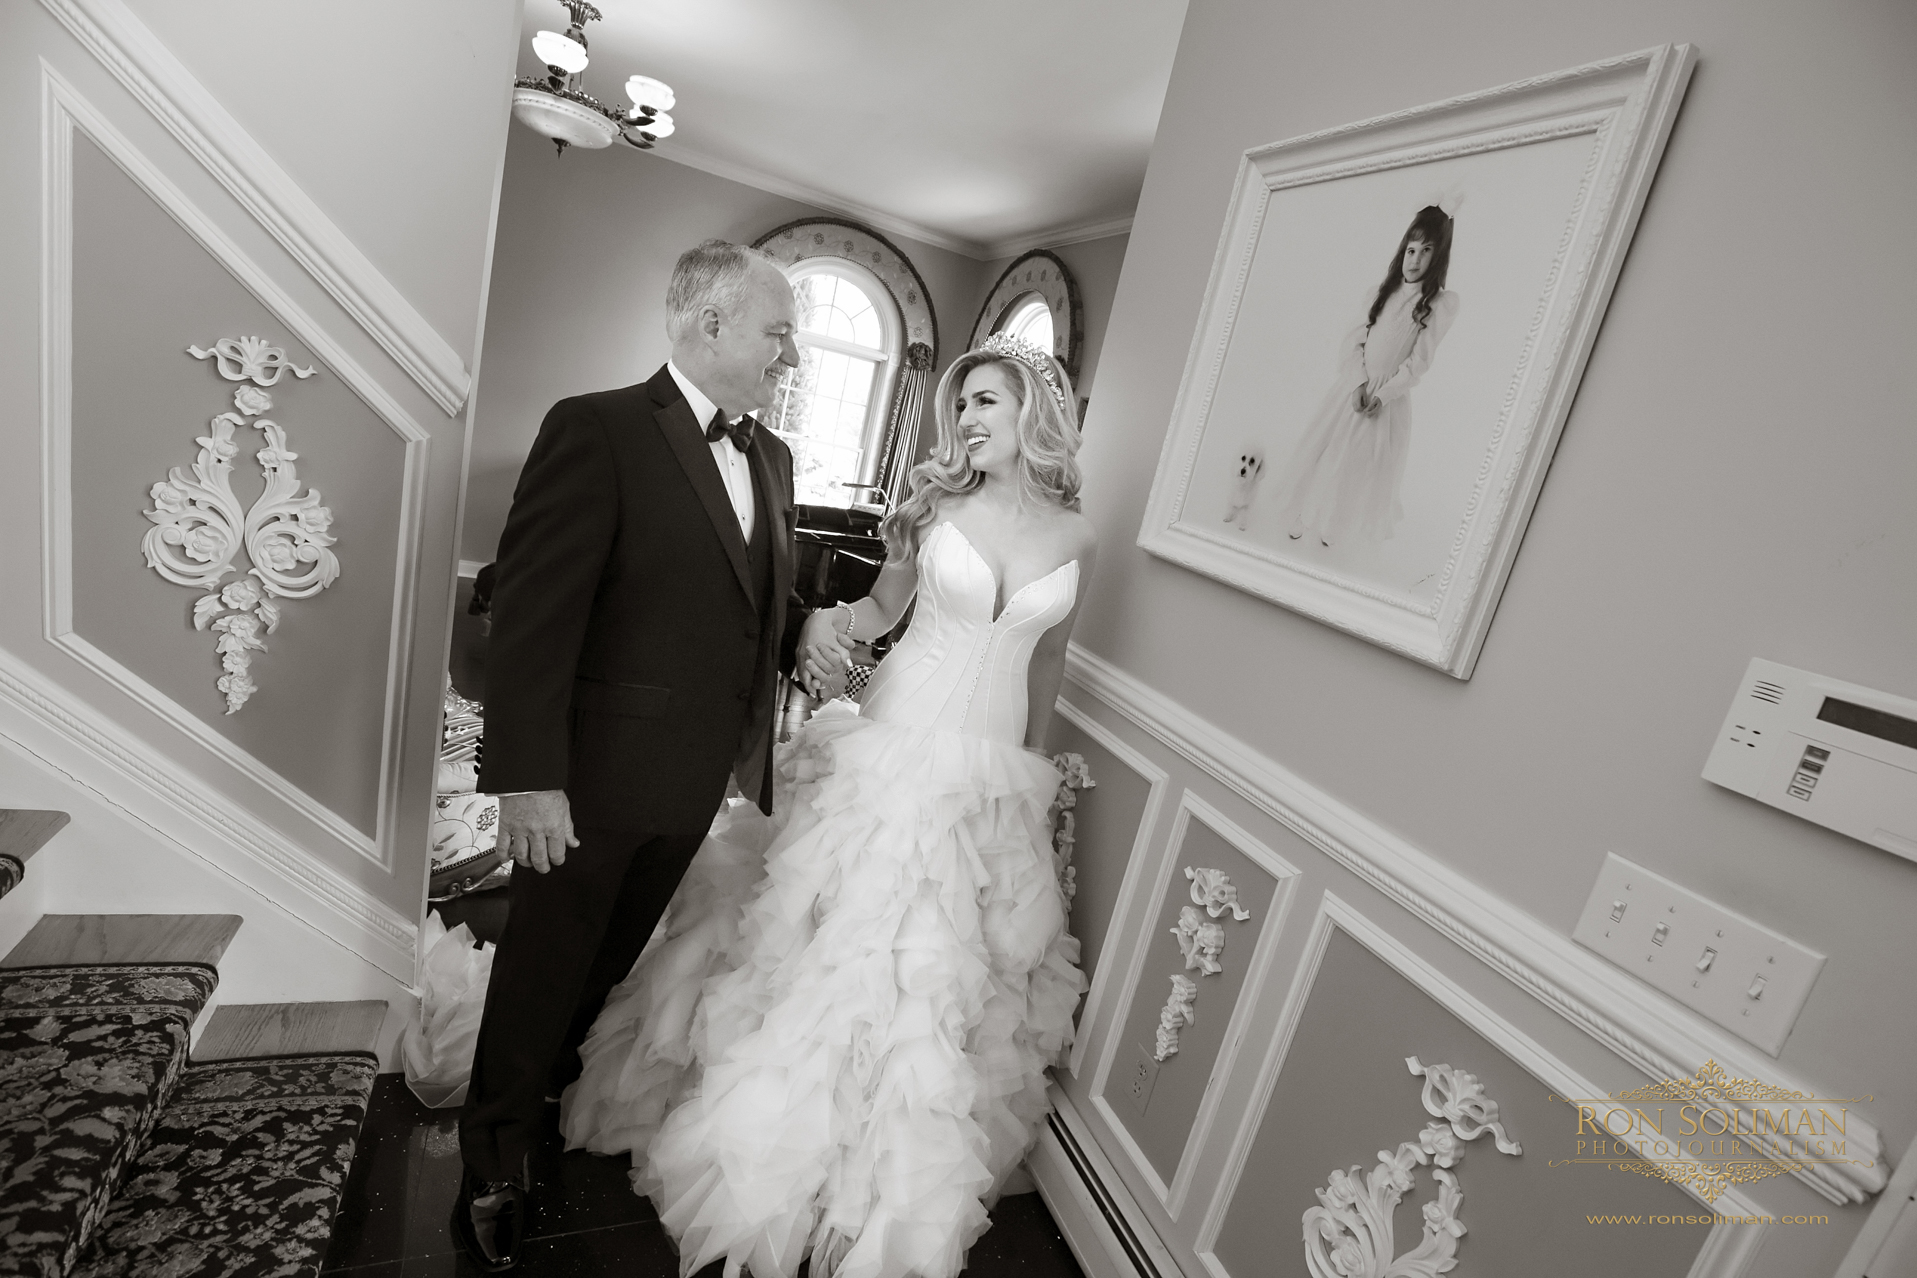 Emotional Father and the Bride | Rainbow Room New York Wedding Noel + Rob